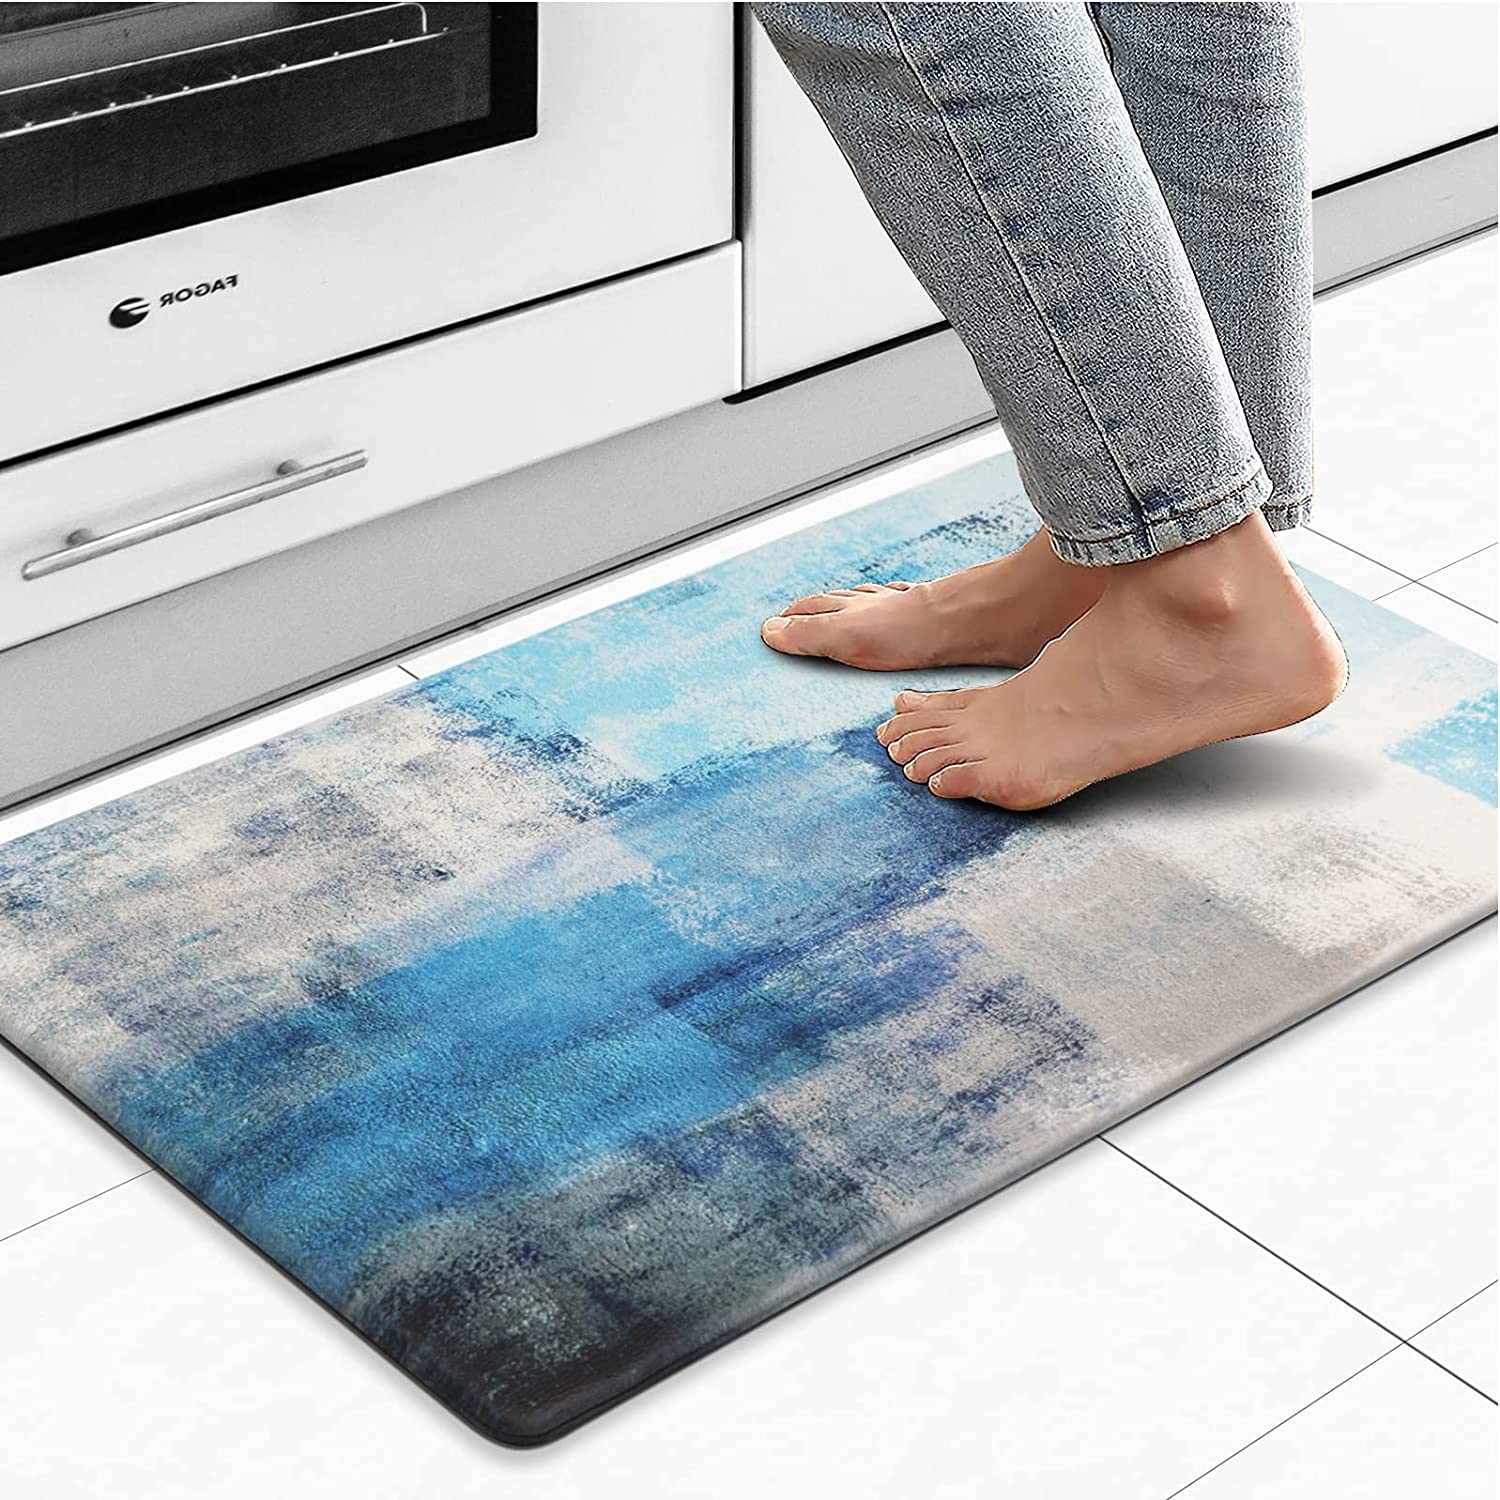 Waterproof Kitchen Rugs Mats Non-slip Abstract PVC Table Cover